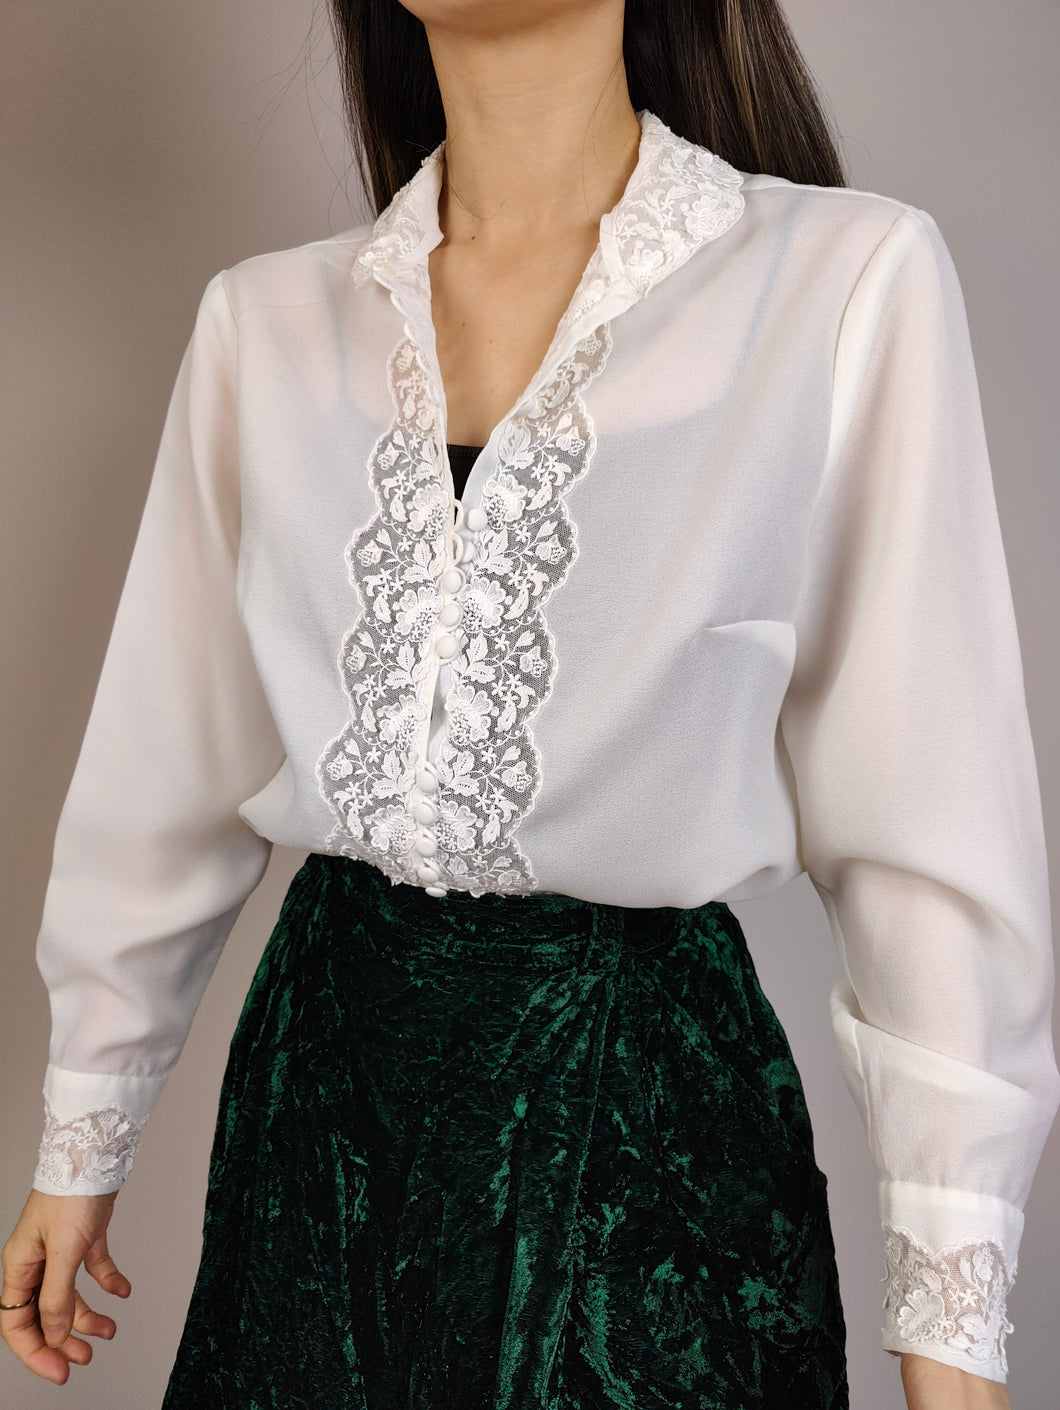 The White Snow Embroidery Blouse | Vintage white blouse floral embroidery collar bavarian cottage core prairie lace S